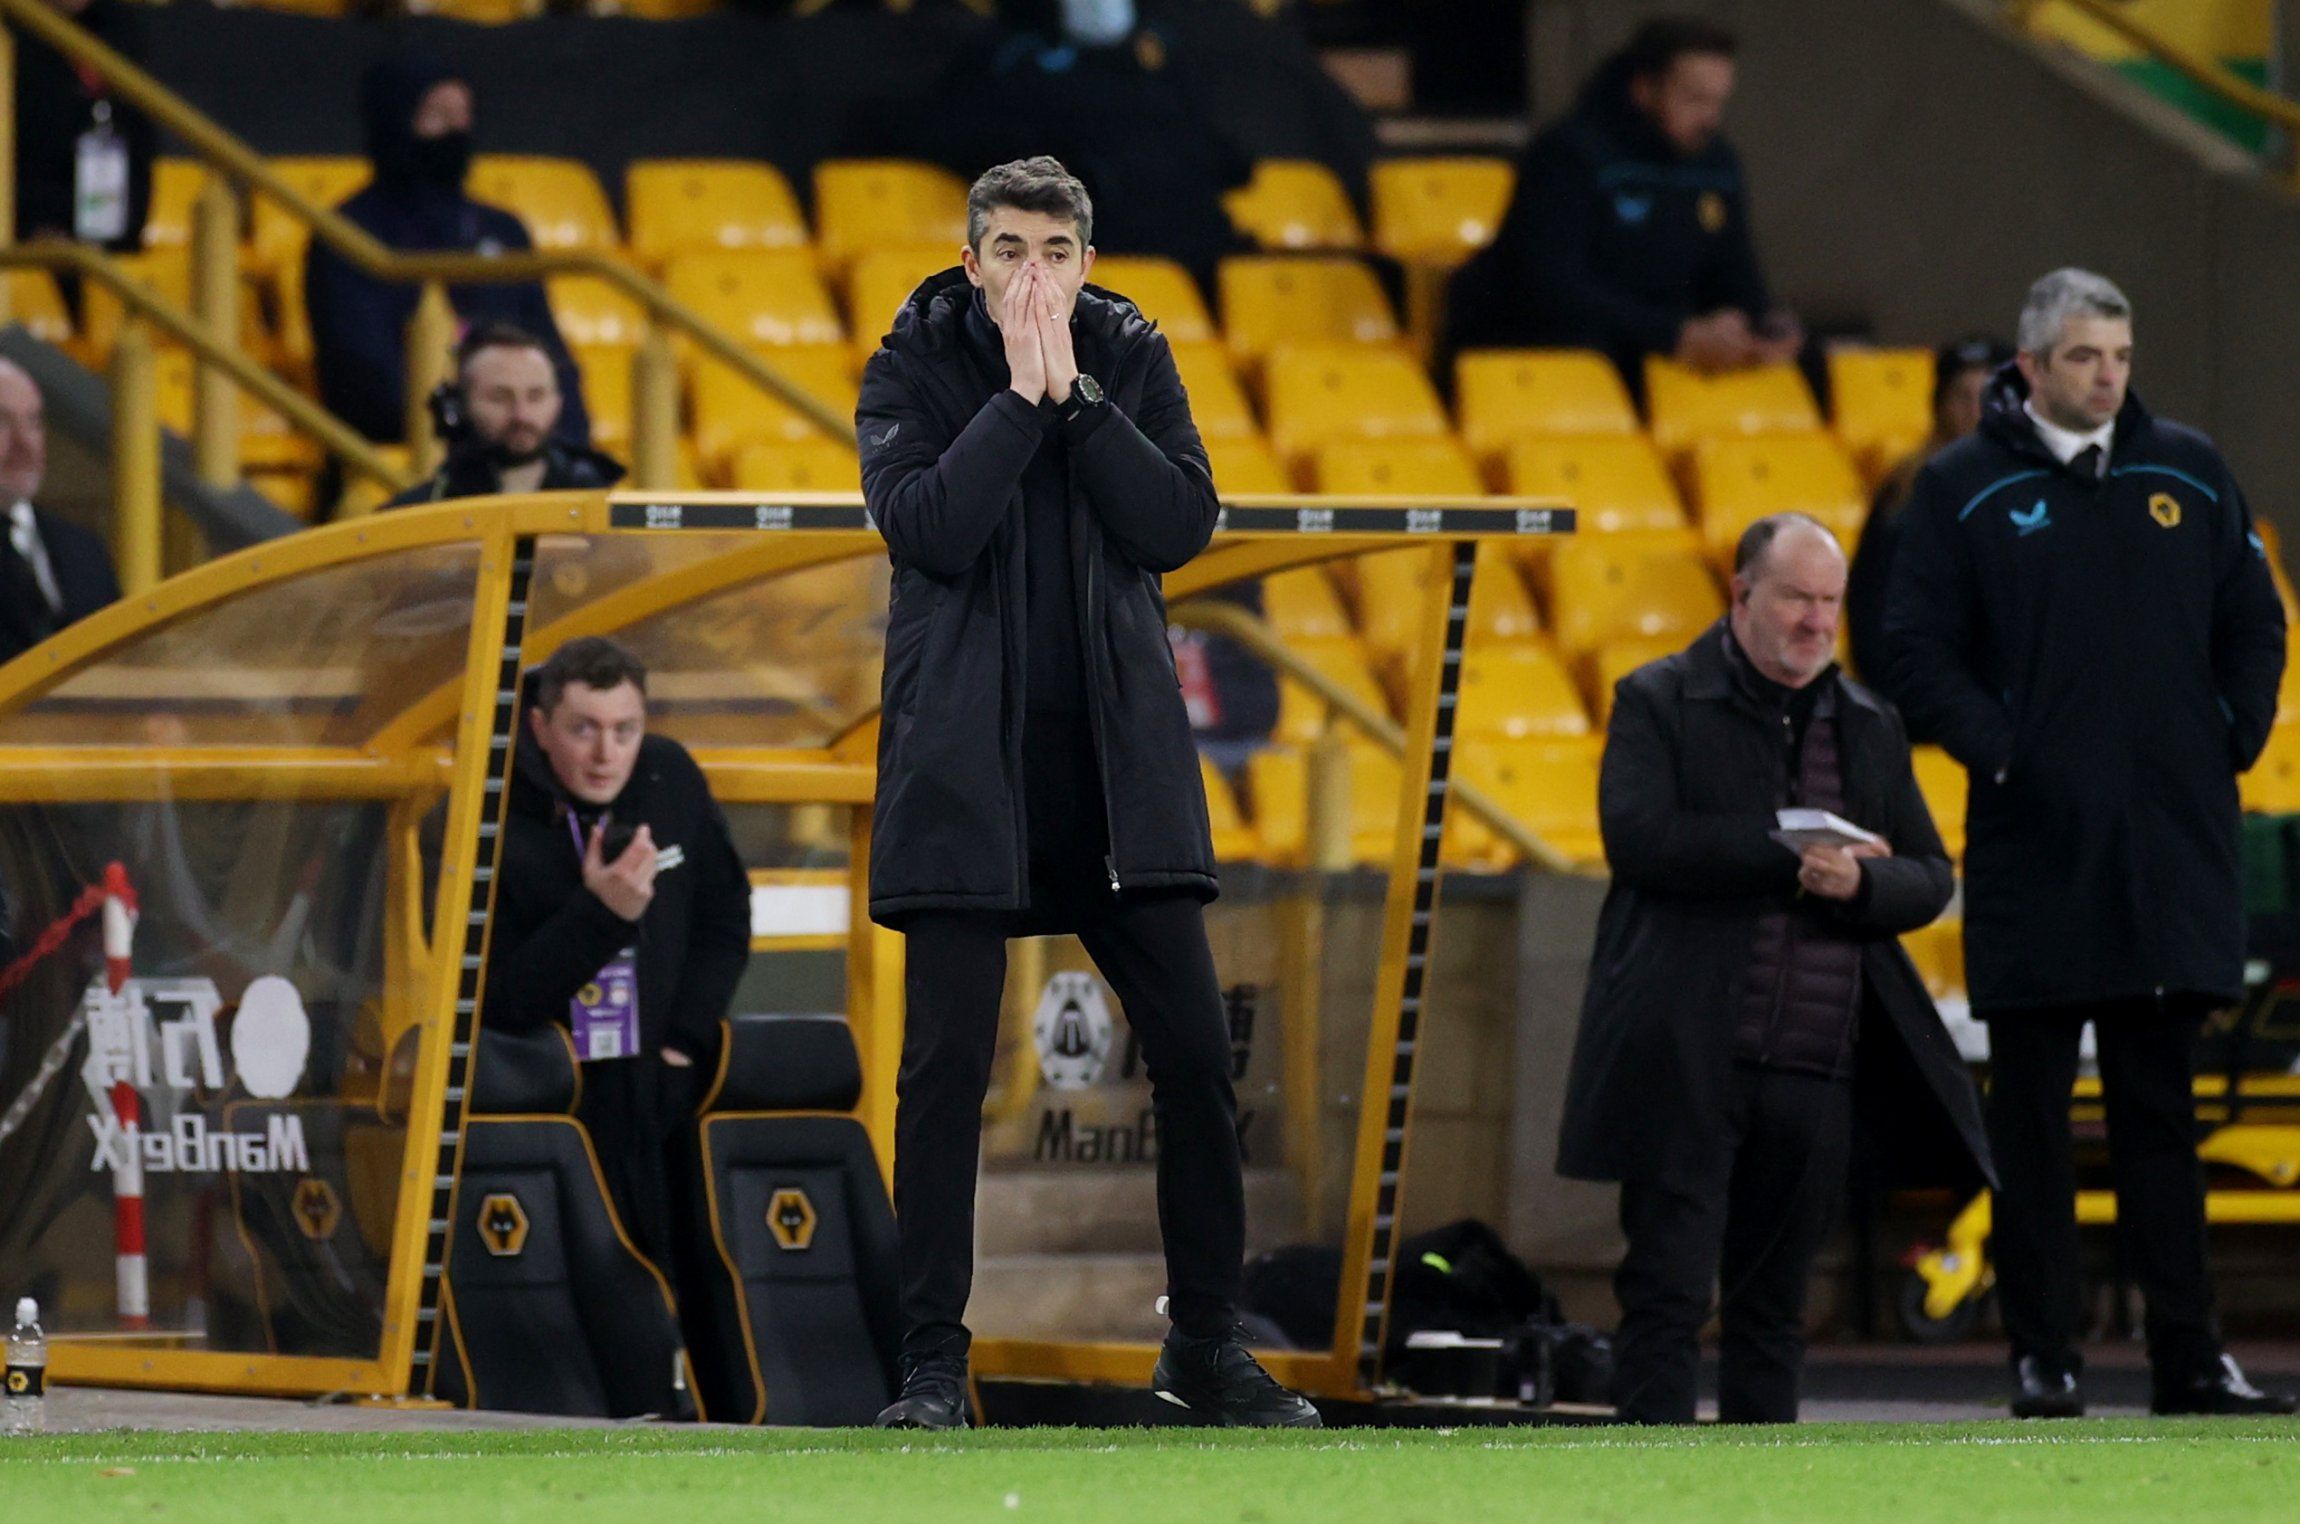 Bruno Lage, Fosun, Jeff Shi, Molineux, The Old Gold, Wolves, Wolves fans, Wolves info, Wolves latest, Wolves news, Wolves updates, WWFC, WWFC news, WWFC update, Premier League, Premier League news, Wolverhampton Wanderers, Wolves transfer news, January transfer window, 
